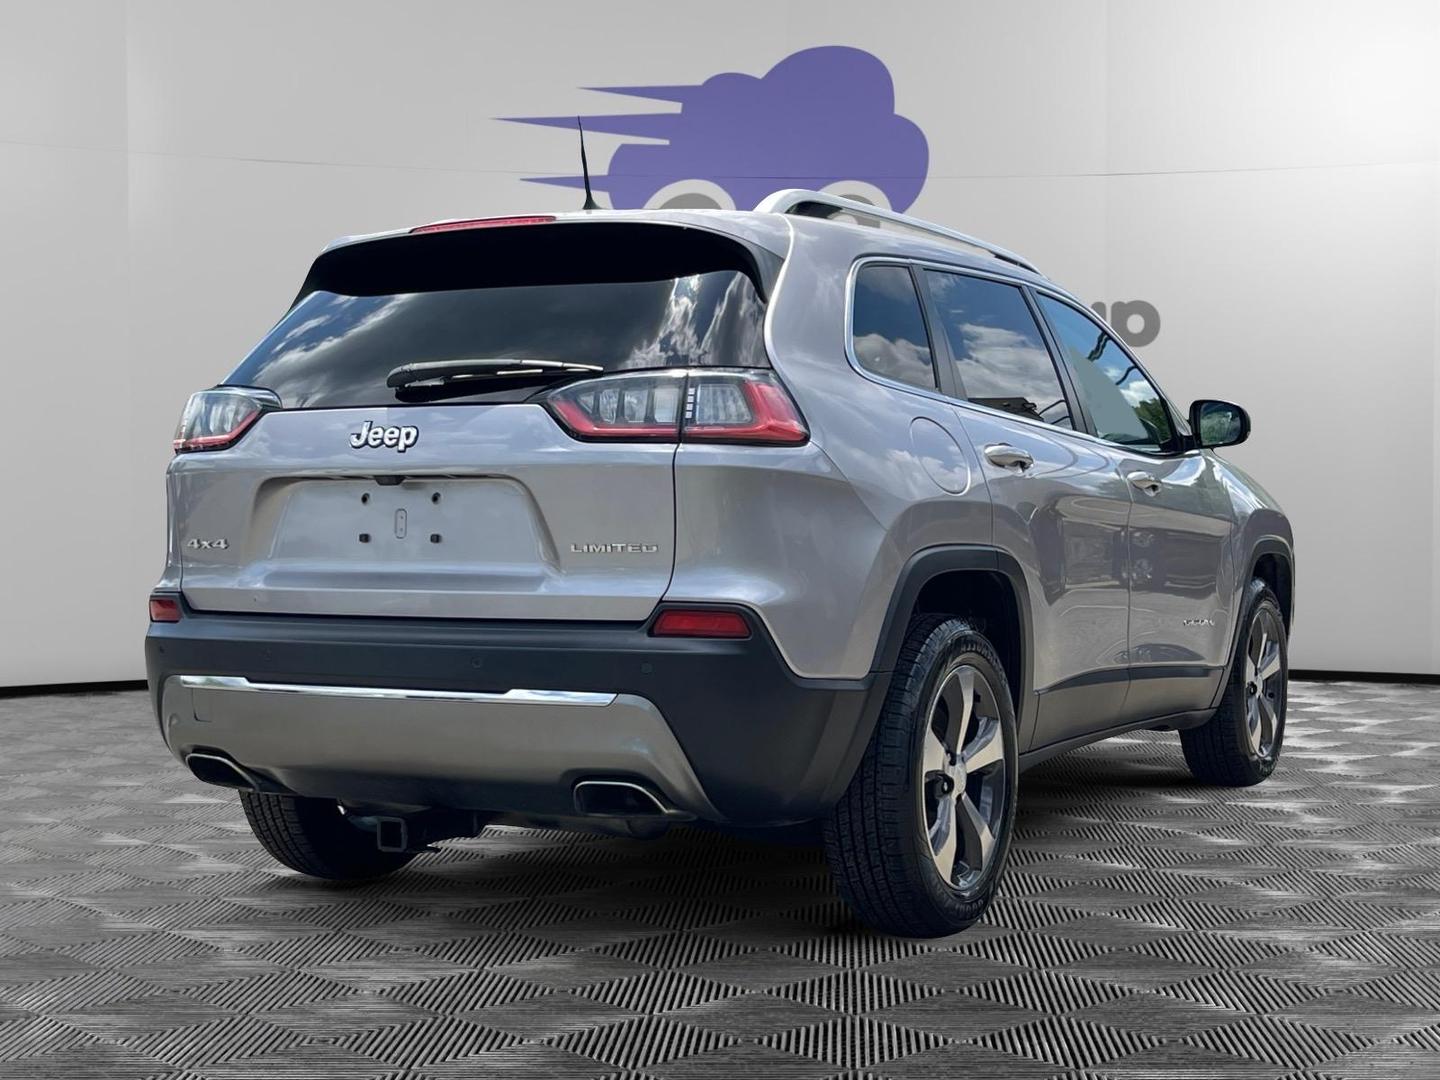 2019 Jeep Cherokee Utility 4d Limited 4wd 3.2l V6 - Image 5